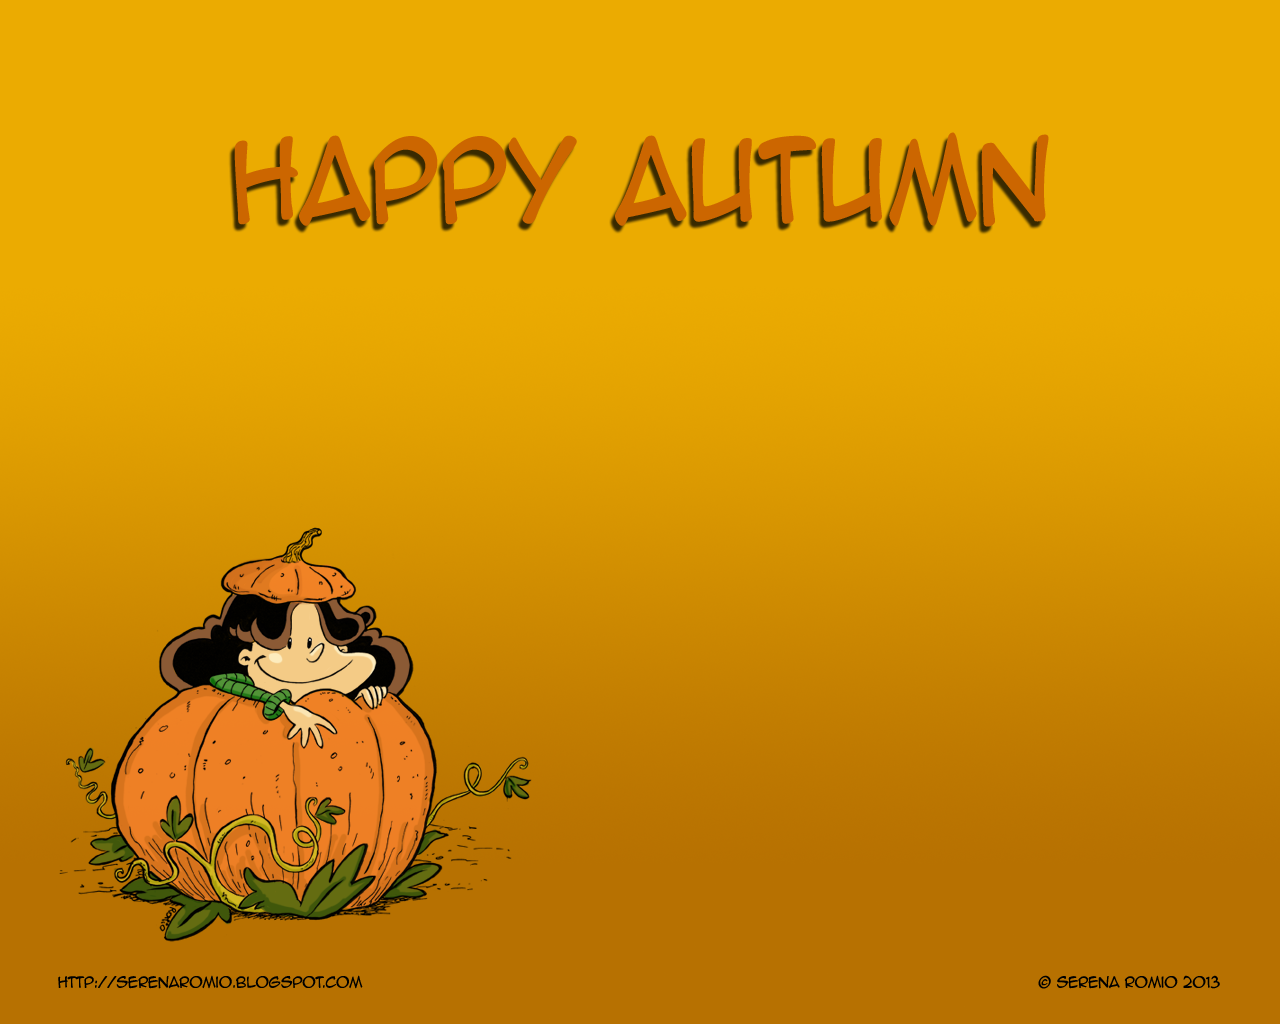 [Wall_autumn01_1280x1024.png]